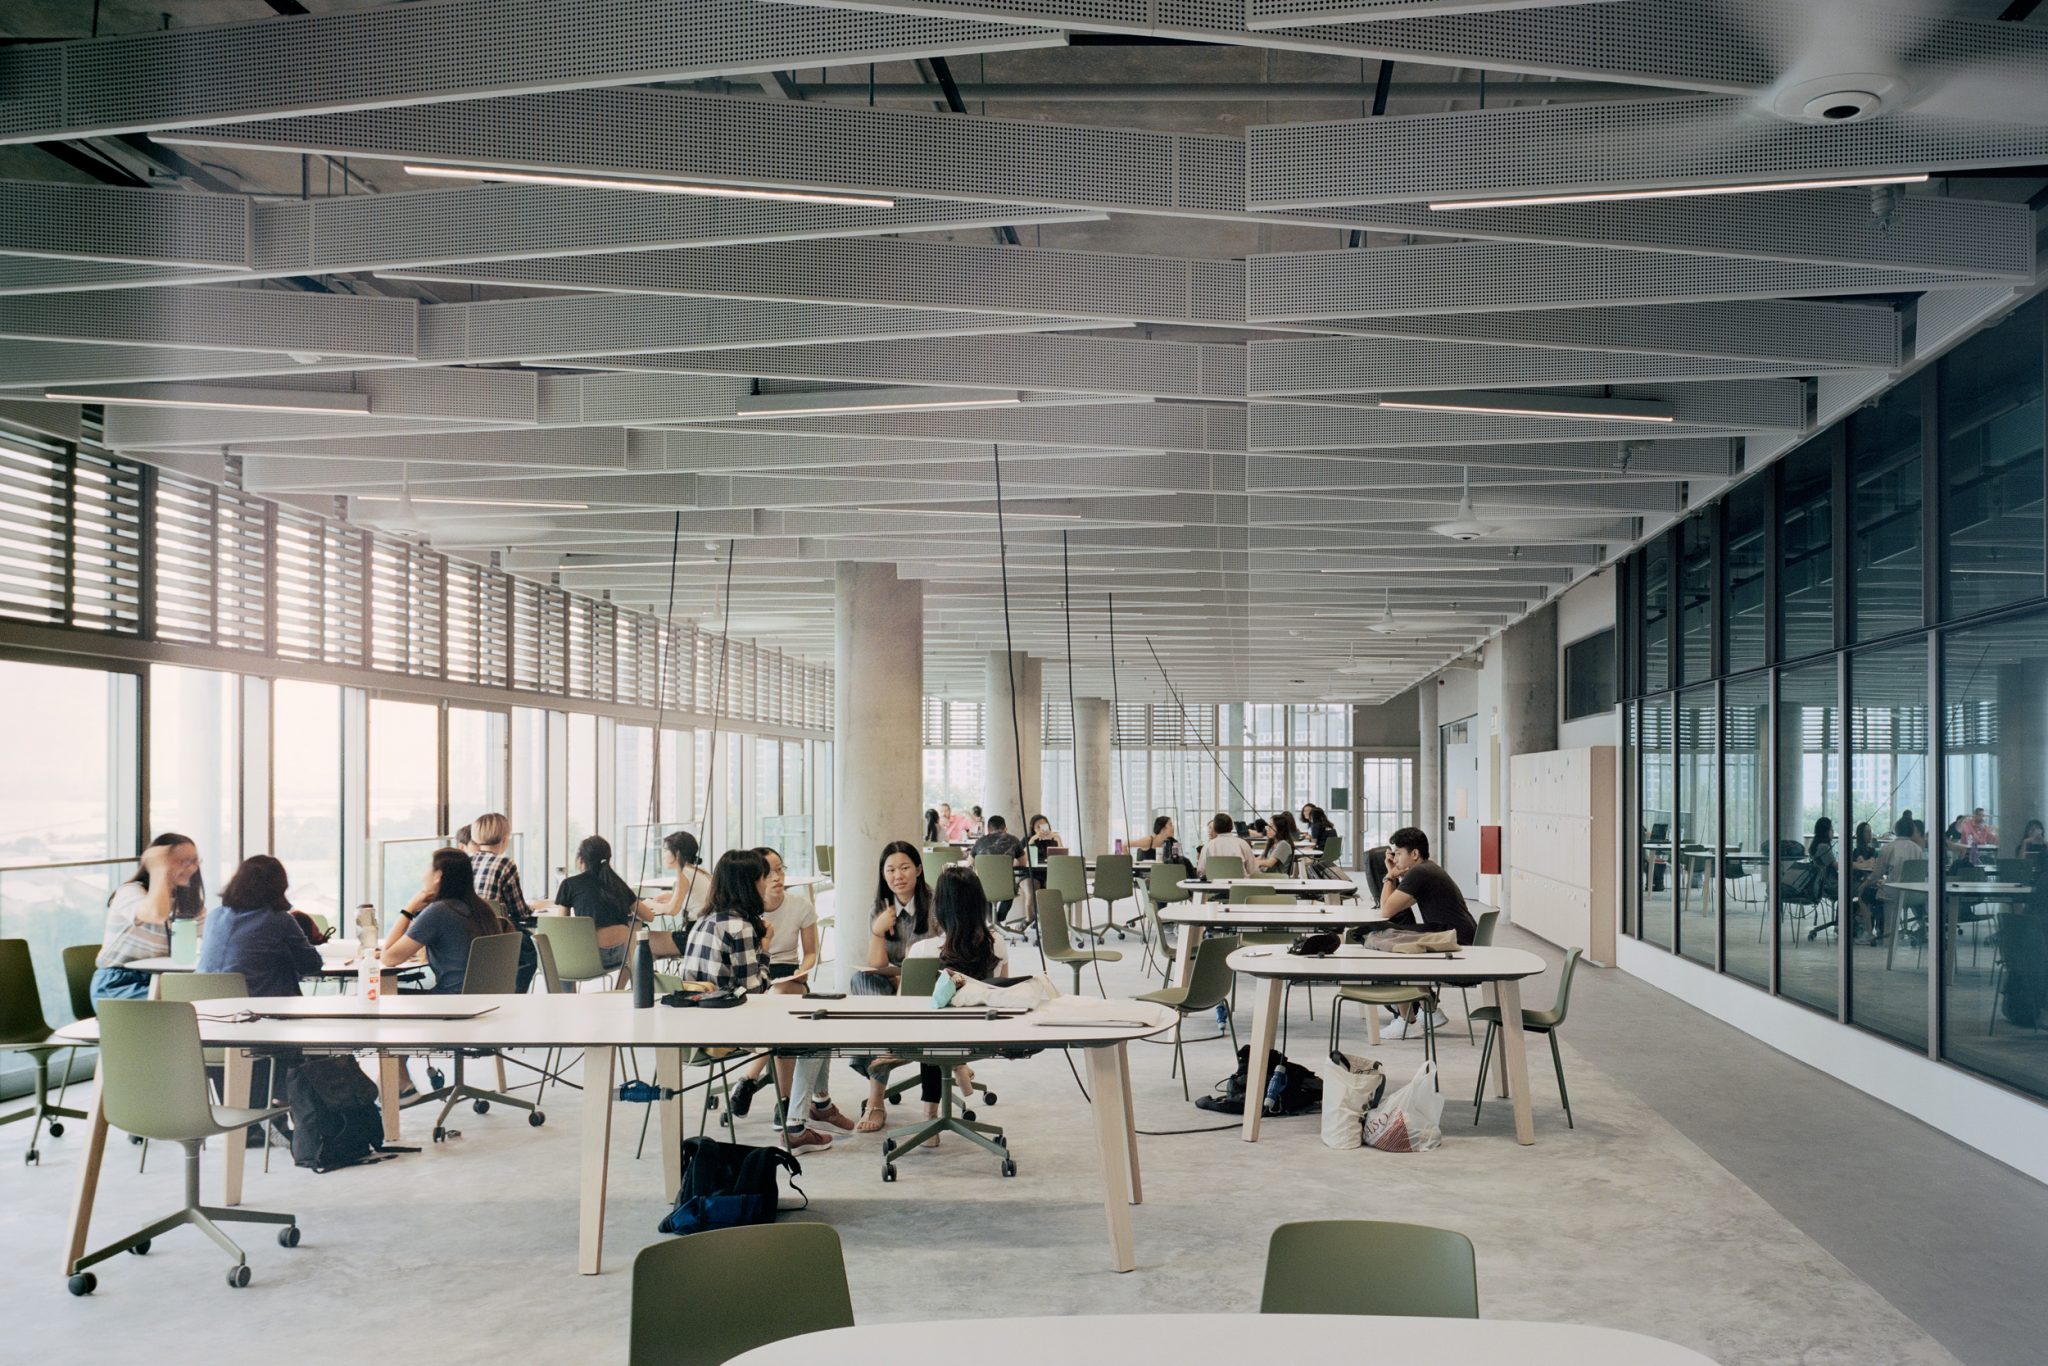 <div style="text-align:center">Rooms within the NUS SDE4 building are designed to maximise ventilation to help cut back on air-conditioning.</div><div style="text-align:center">PHOTO: COURTESY OF SCHOOL OF DESIGN AND ENVIRONMENT AND SERIE ARCHITECTS</div>